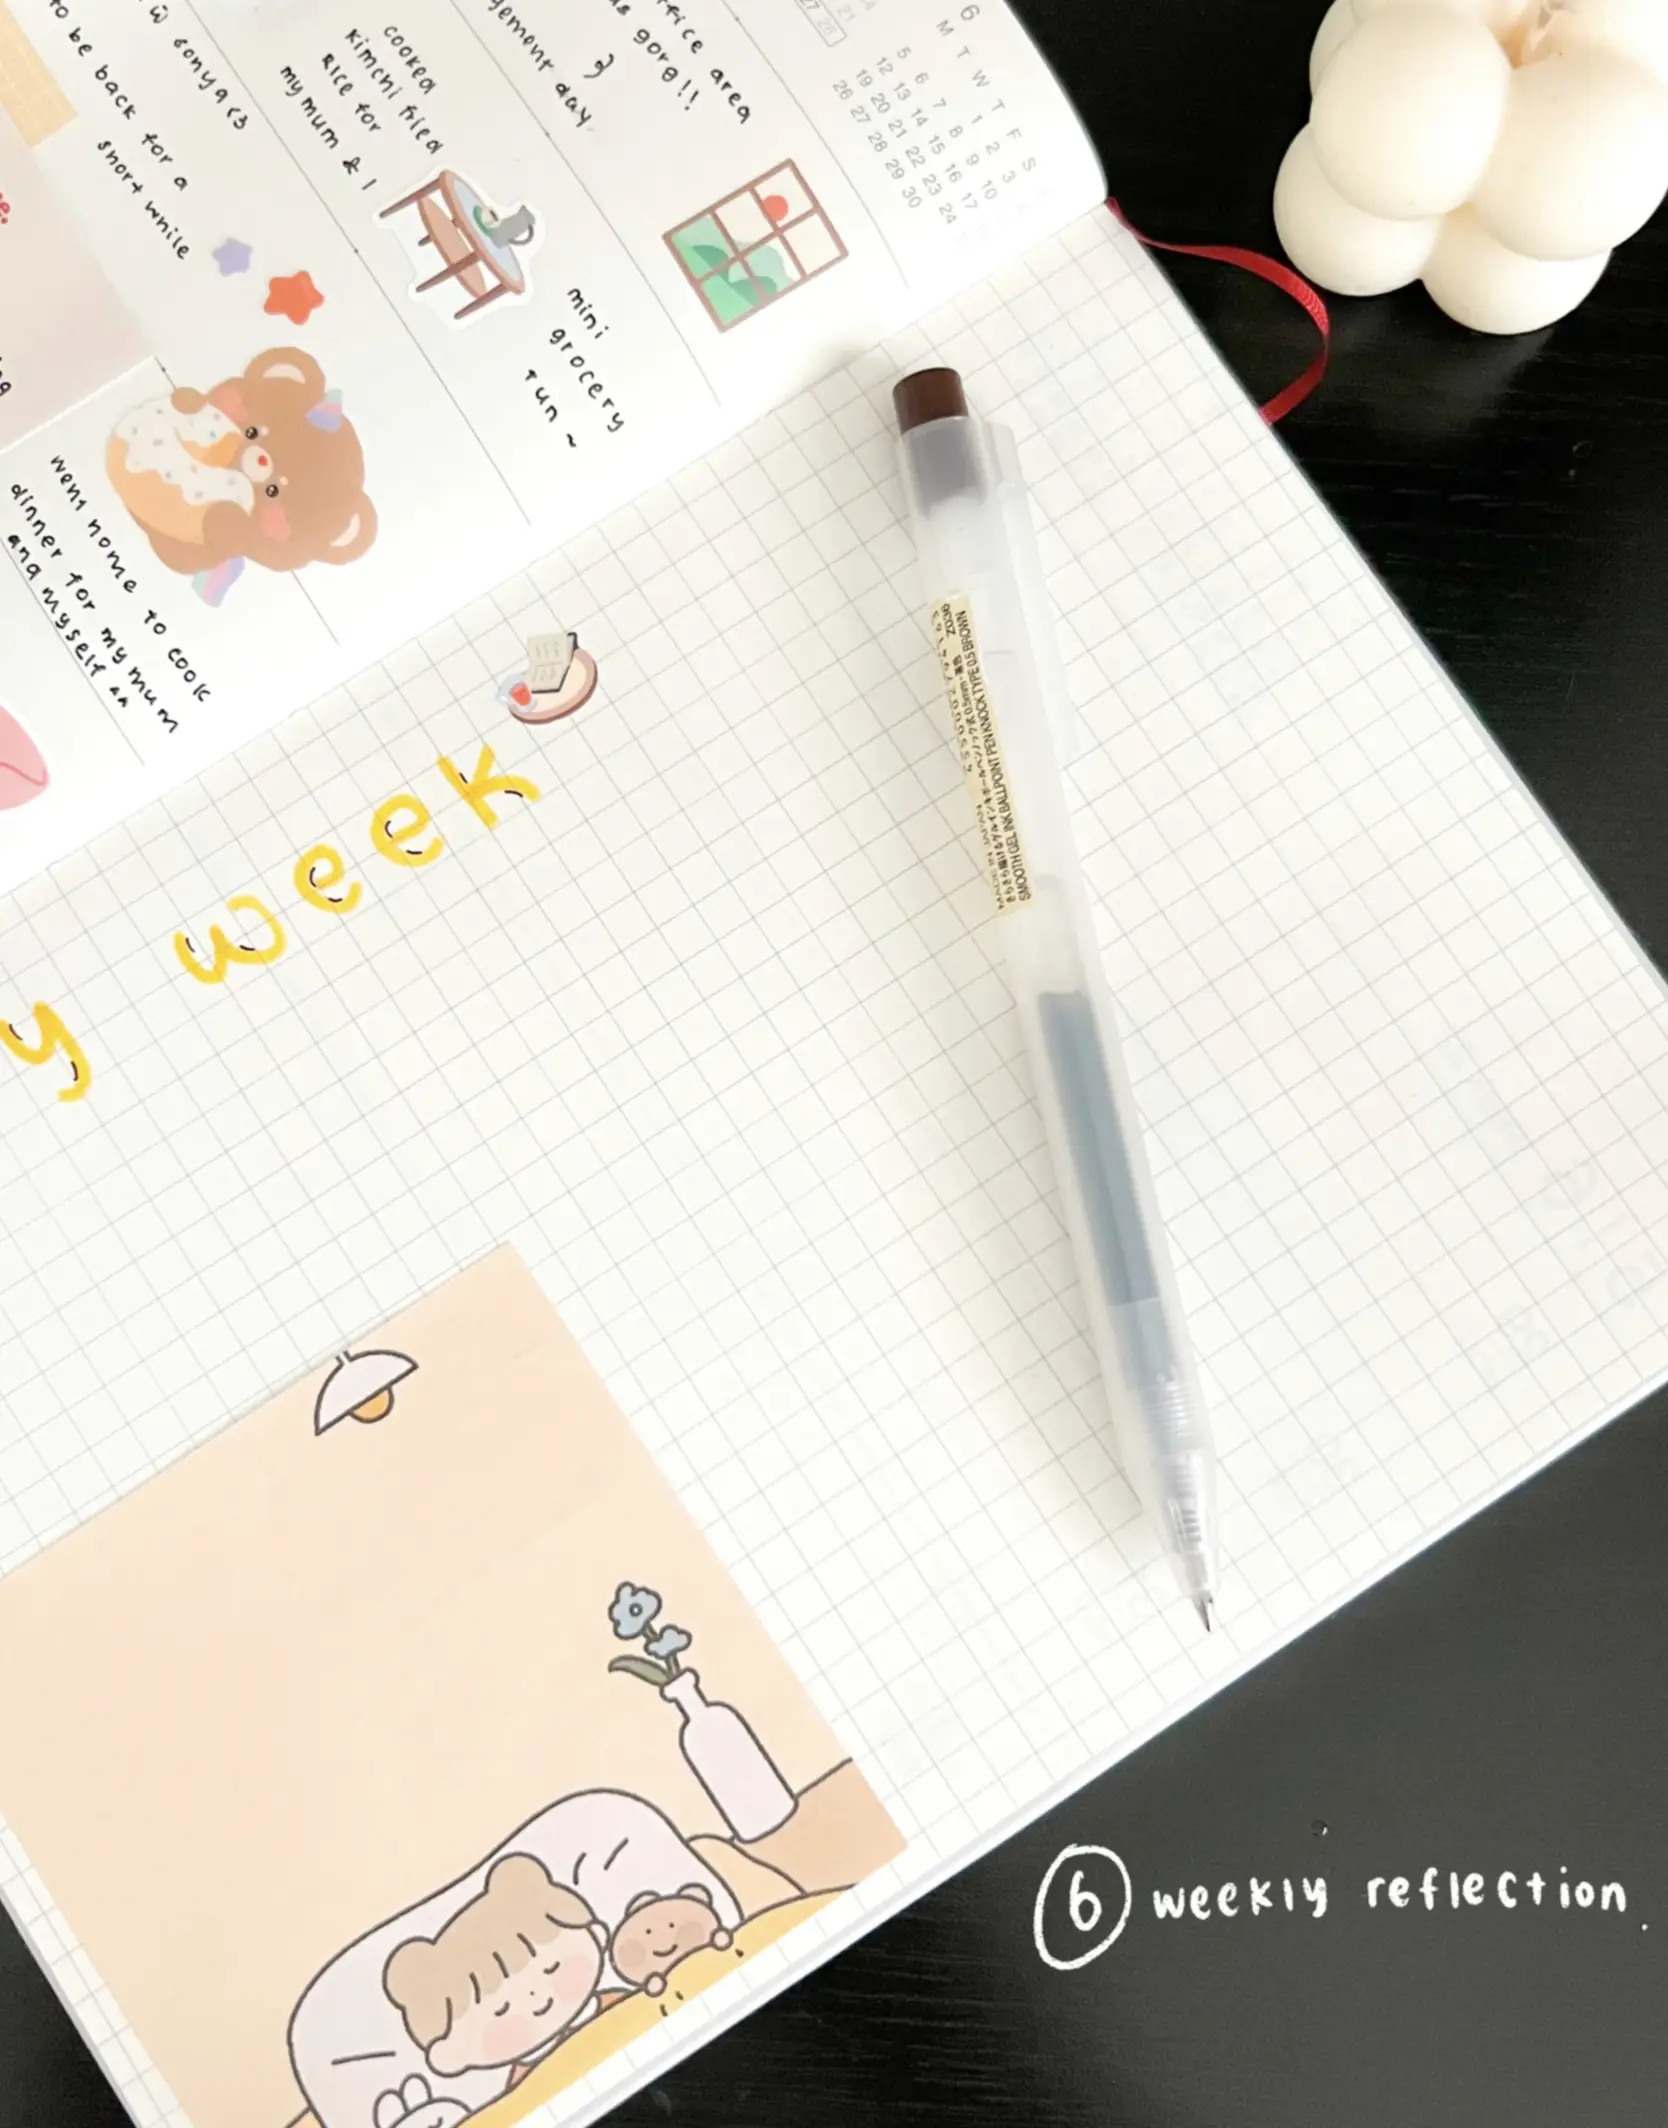 journaling tips to get started 📓's images(7)